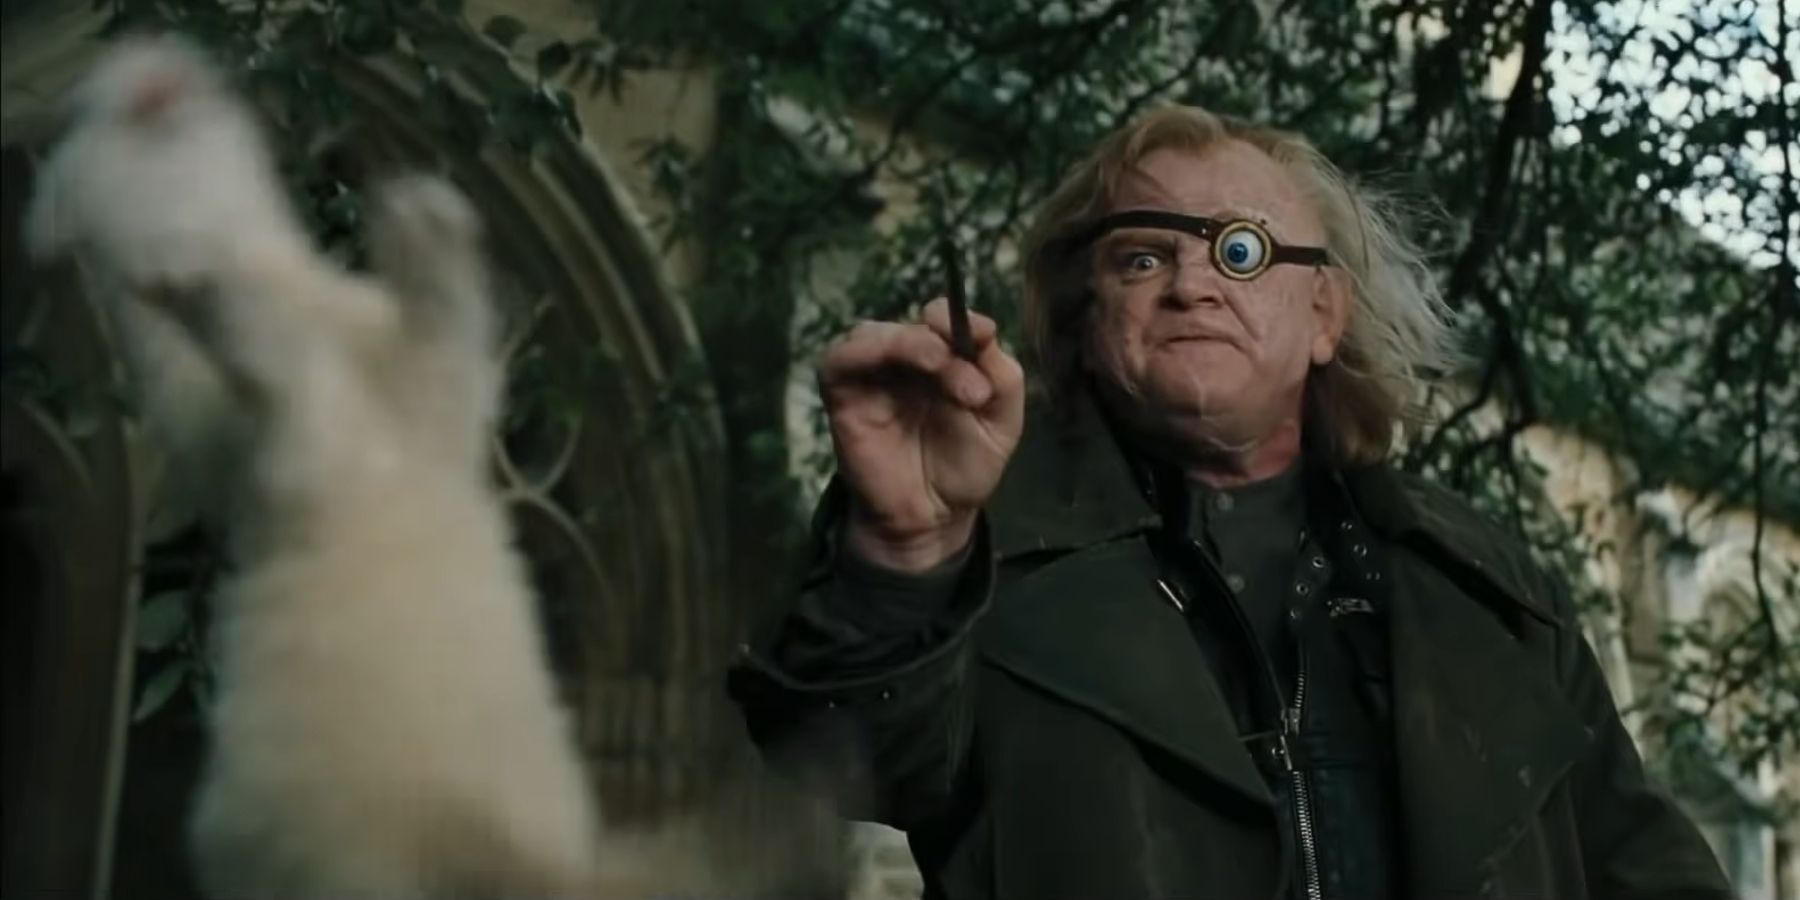 Alastor Mad-Eye Moody using magic on Draco Malfoy as a ferret in Harry Potter And The Goblet Of Fire